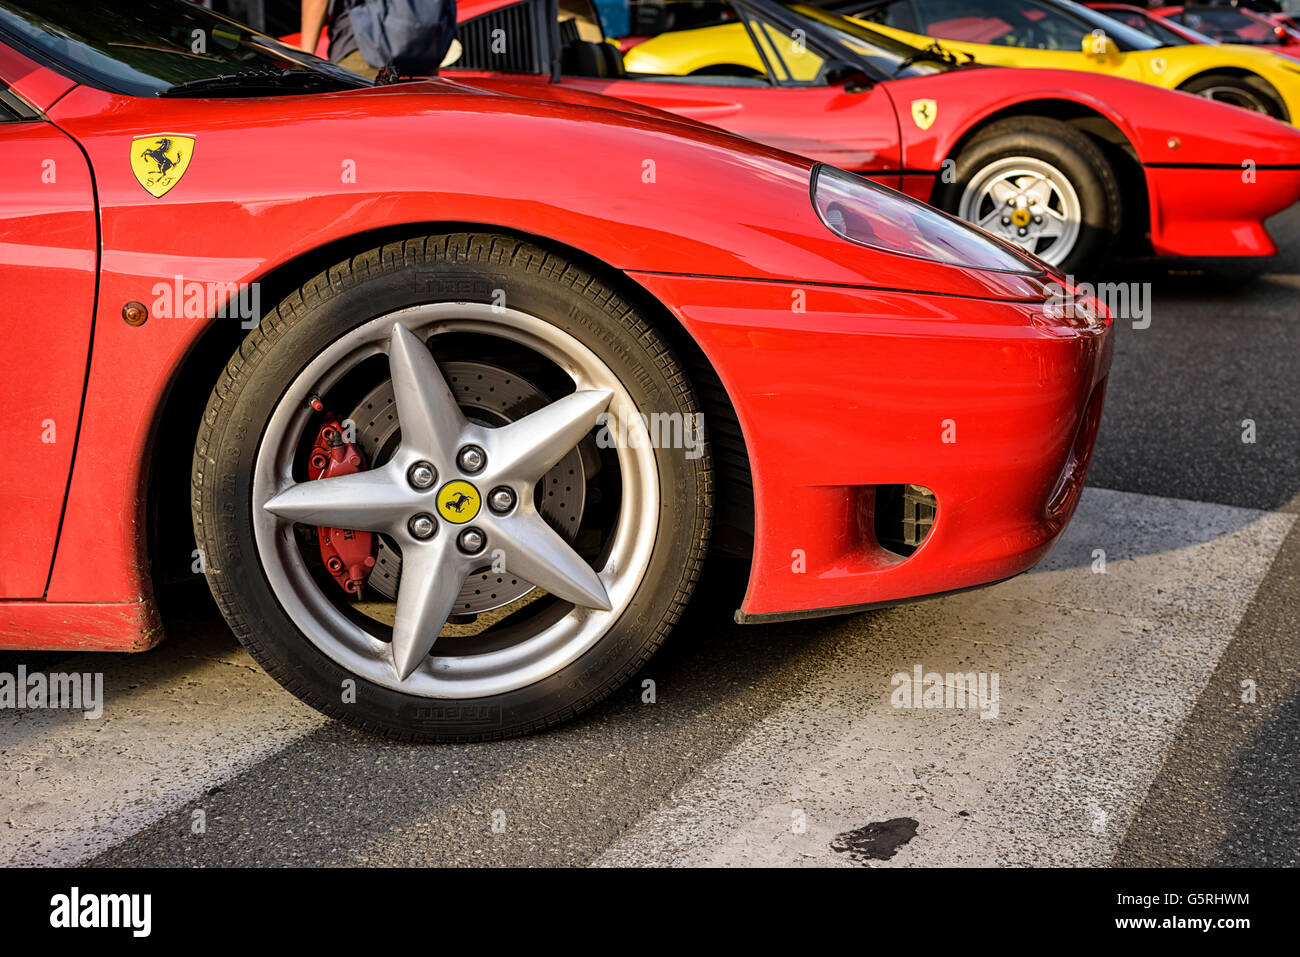 Fifth edition of the Maranello red night with Ferrari car on display in the streets of the country Stock Photo